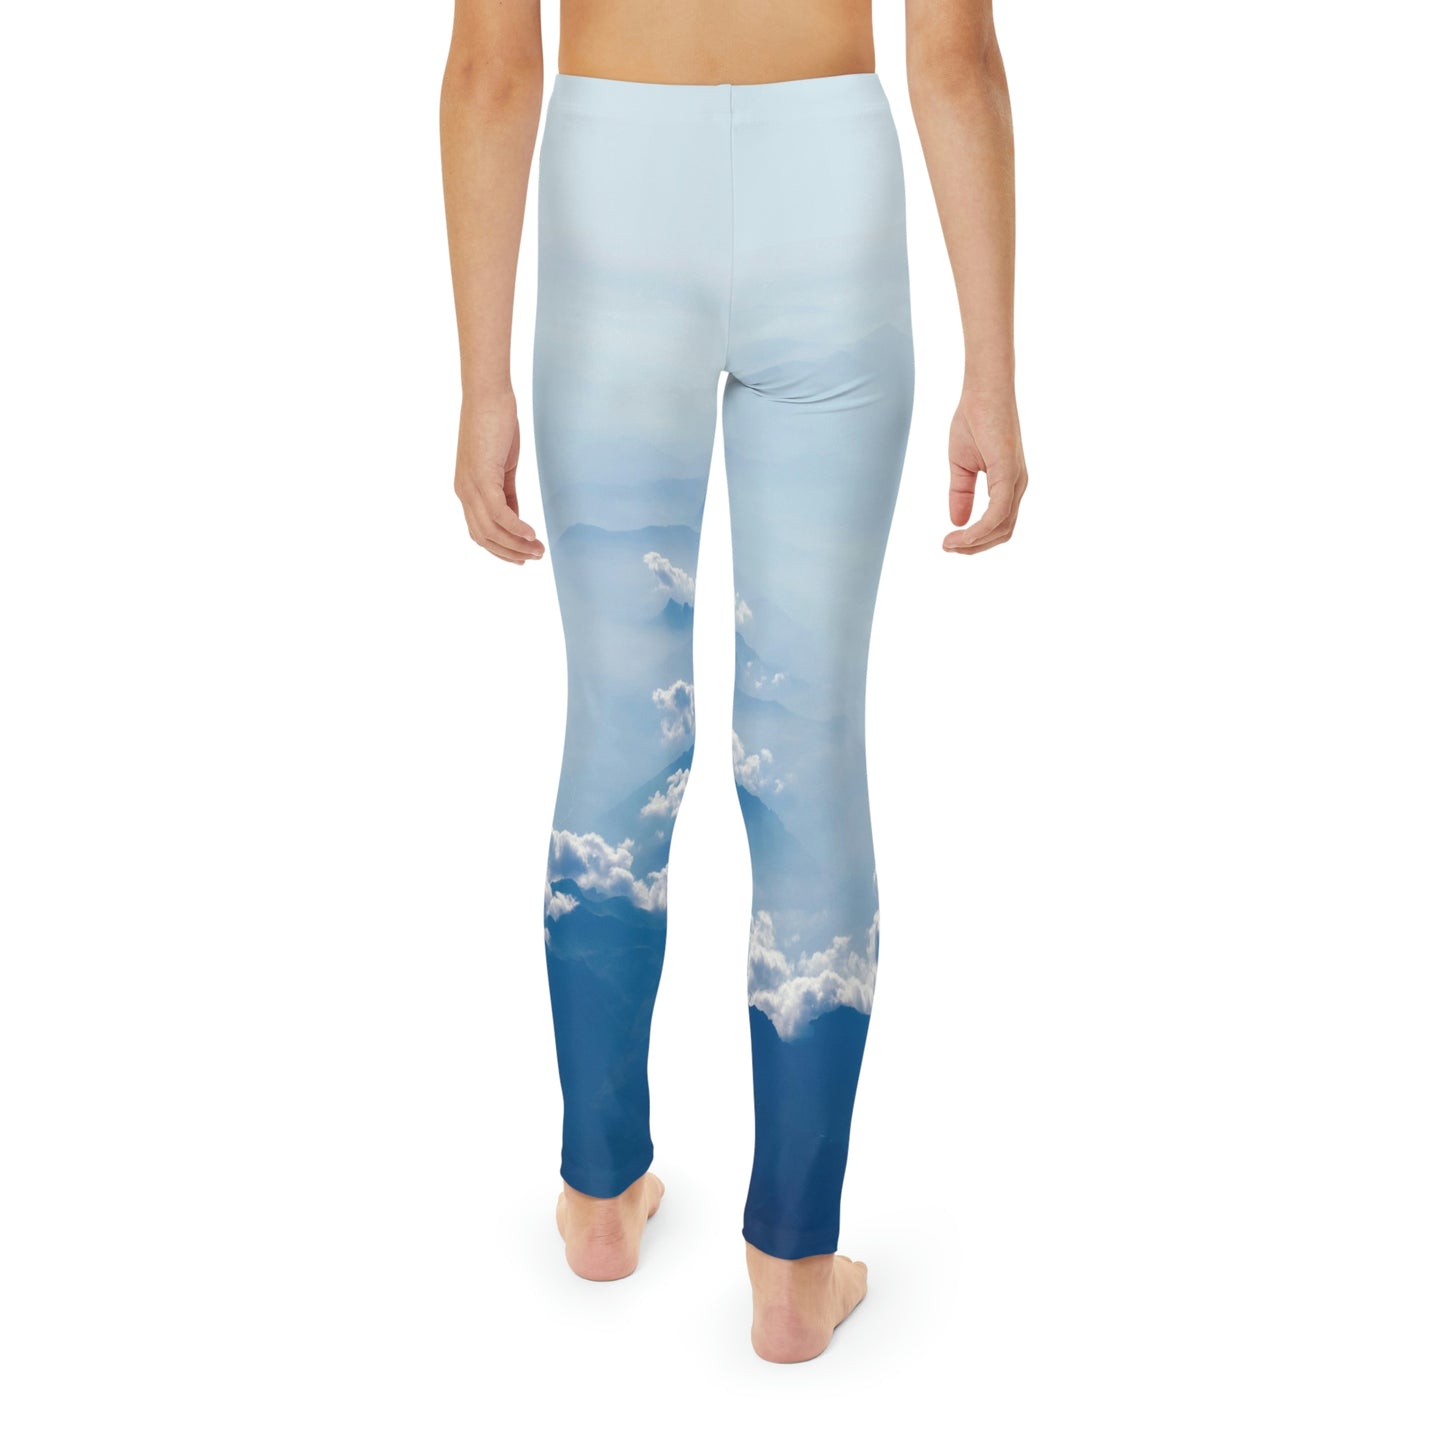 Cloudy Sky Youth Full-Length Leggings, Cloud Yoga Leggings, Clouds Print Leggings, High Waisted, Crossover Leggings,Soft Blue Stretch Pants with Clouds, Chic Boho Activewear ,Dance Fitness and Athleisure